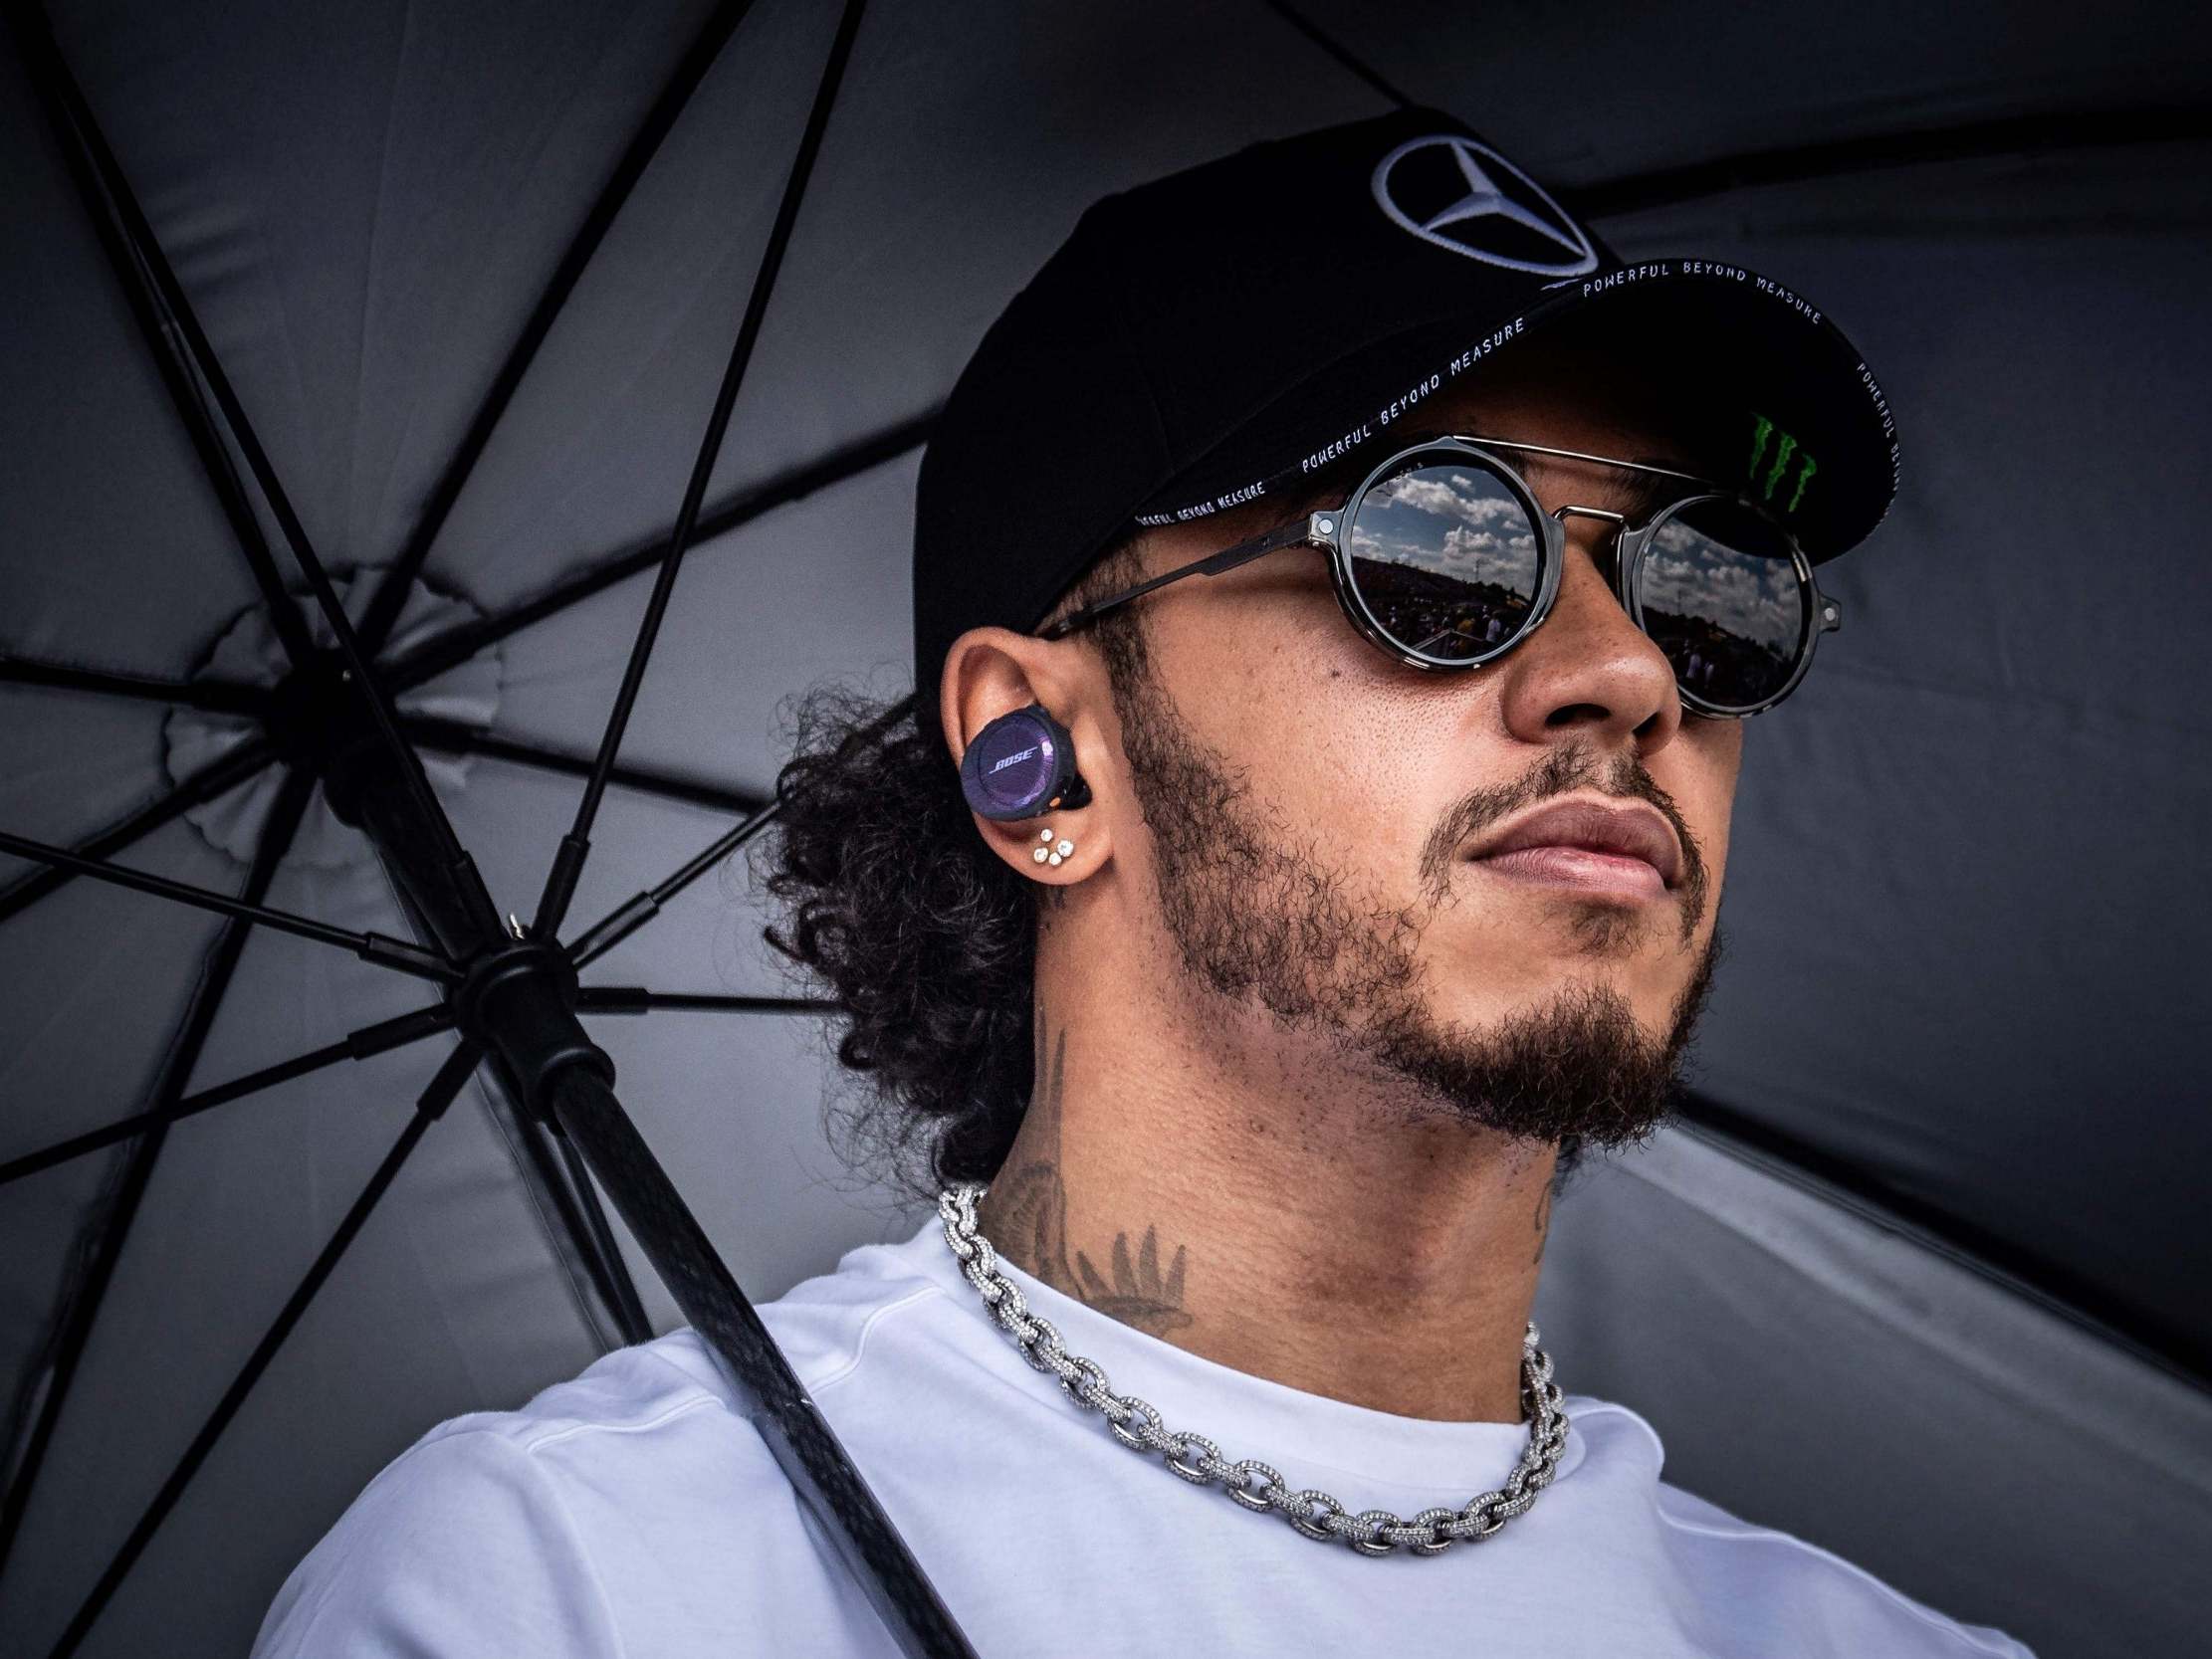 Lewis Hamilton's active stance against racial injustice will be remembered for the right reasons